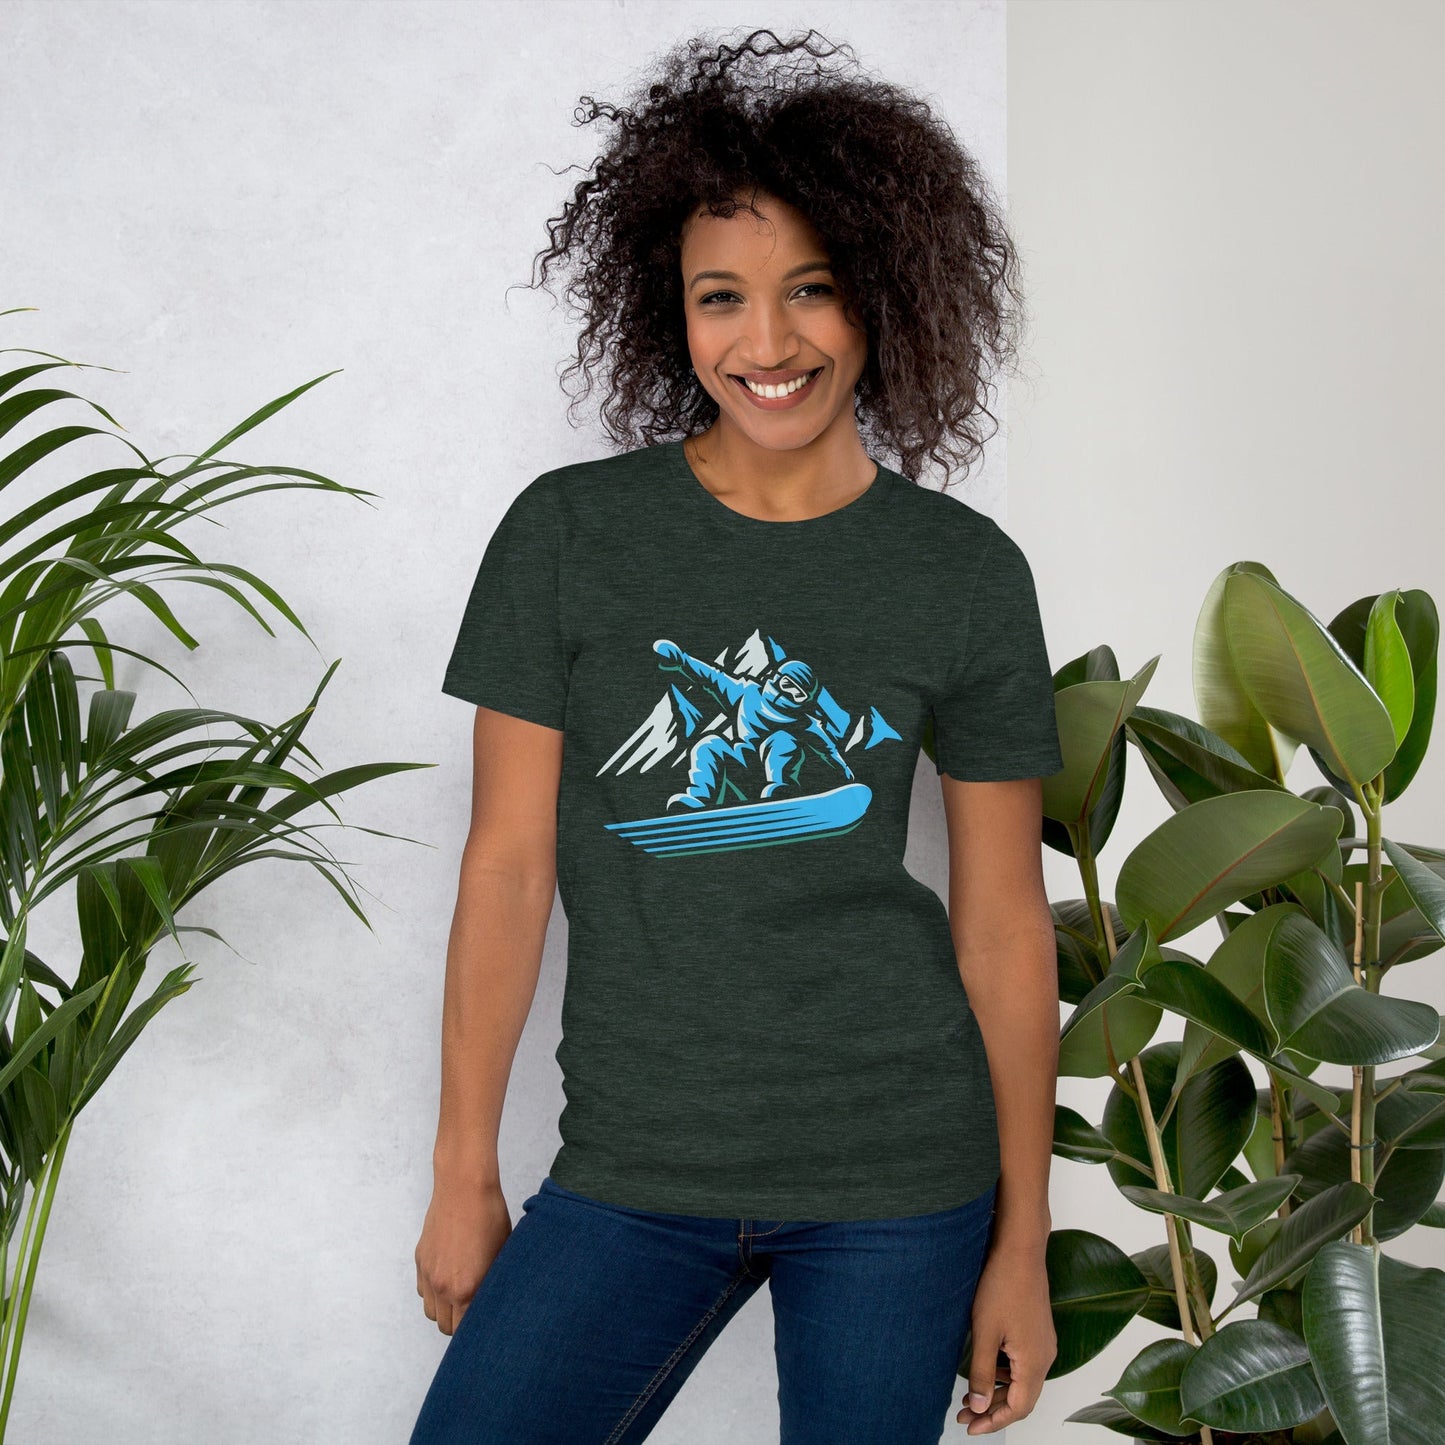 Shop Snowboarding Graphic Tees